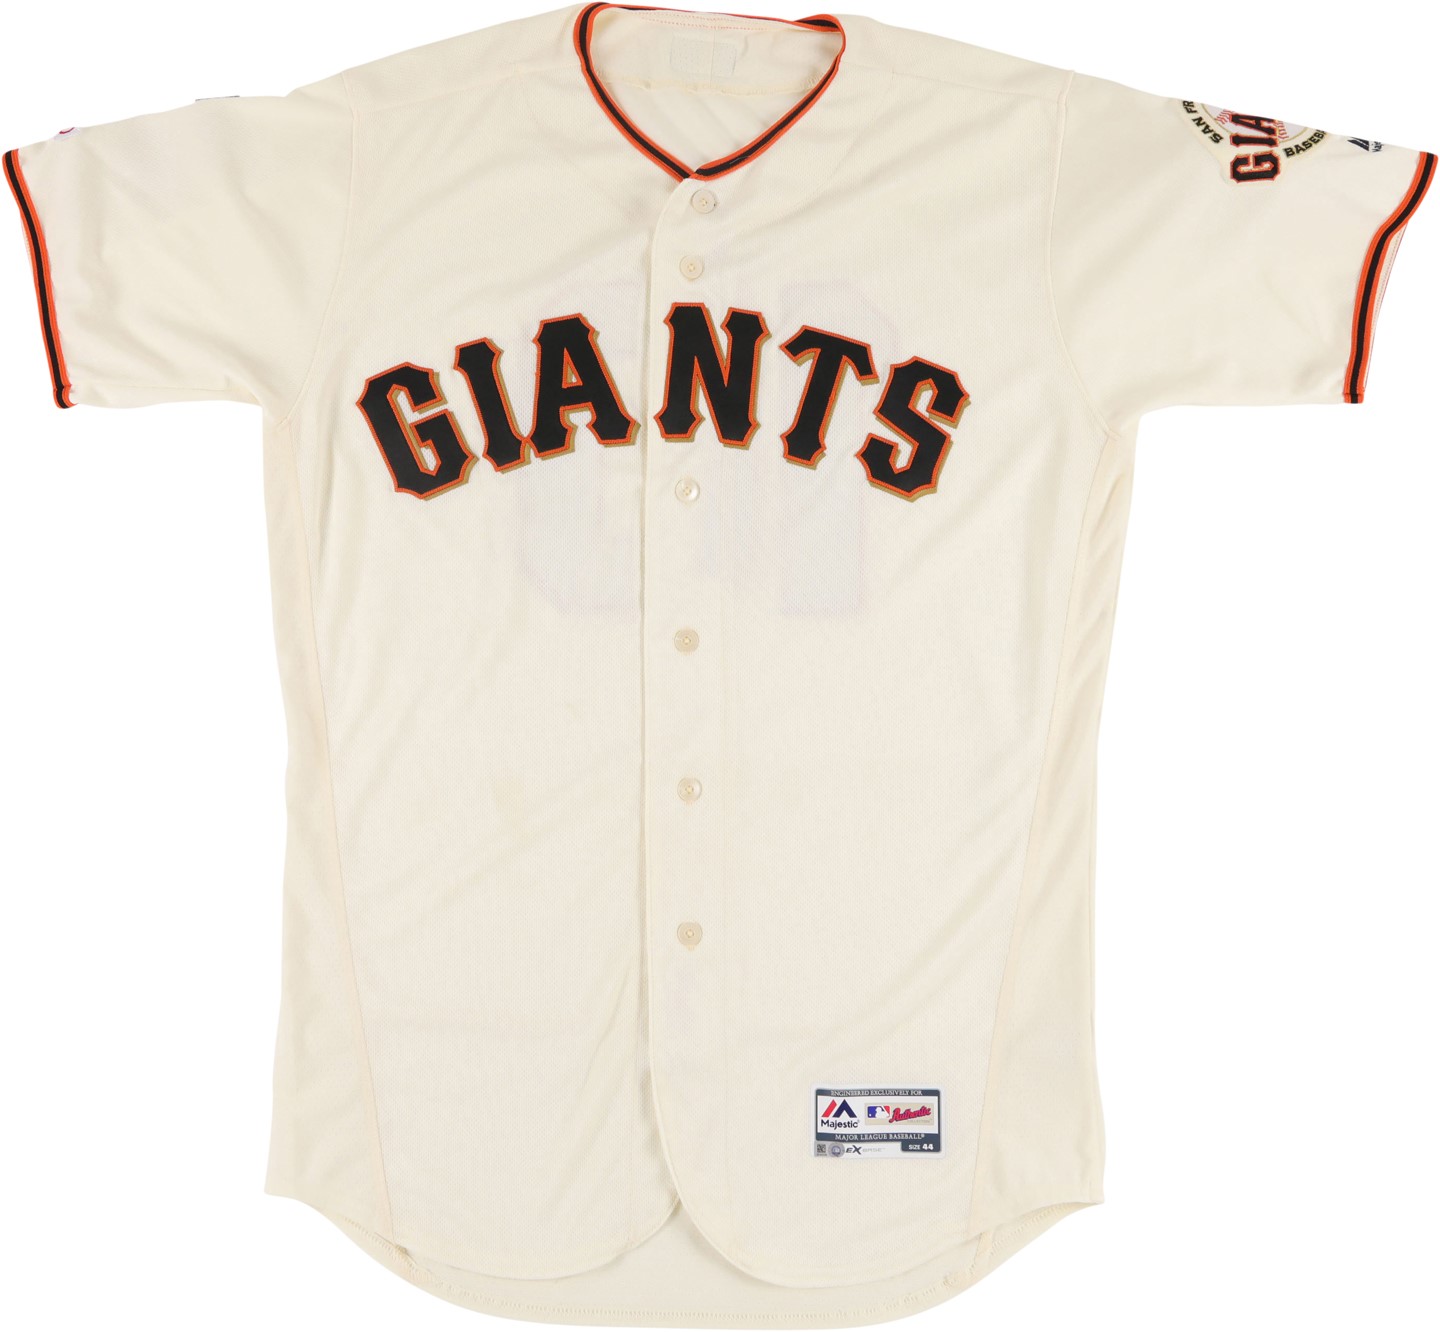 - 5/1/19 Evan Longoria San Francisco Giants Signed Game Worn Jersey with Four Patches (MLB Holo & Photo-Matched)